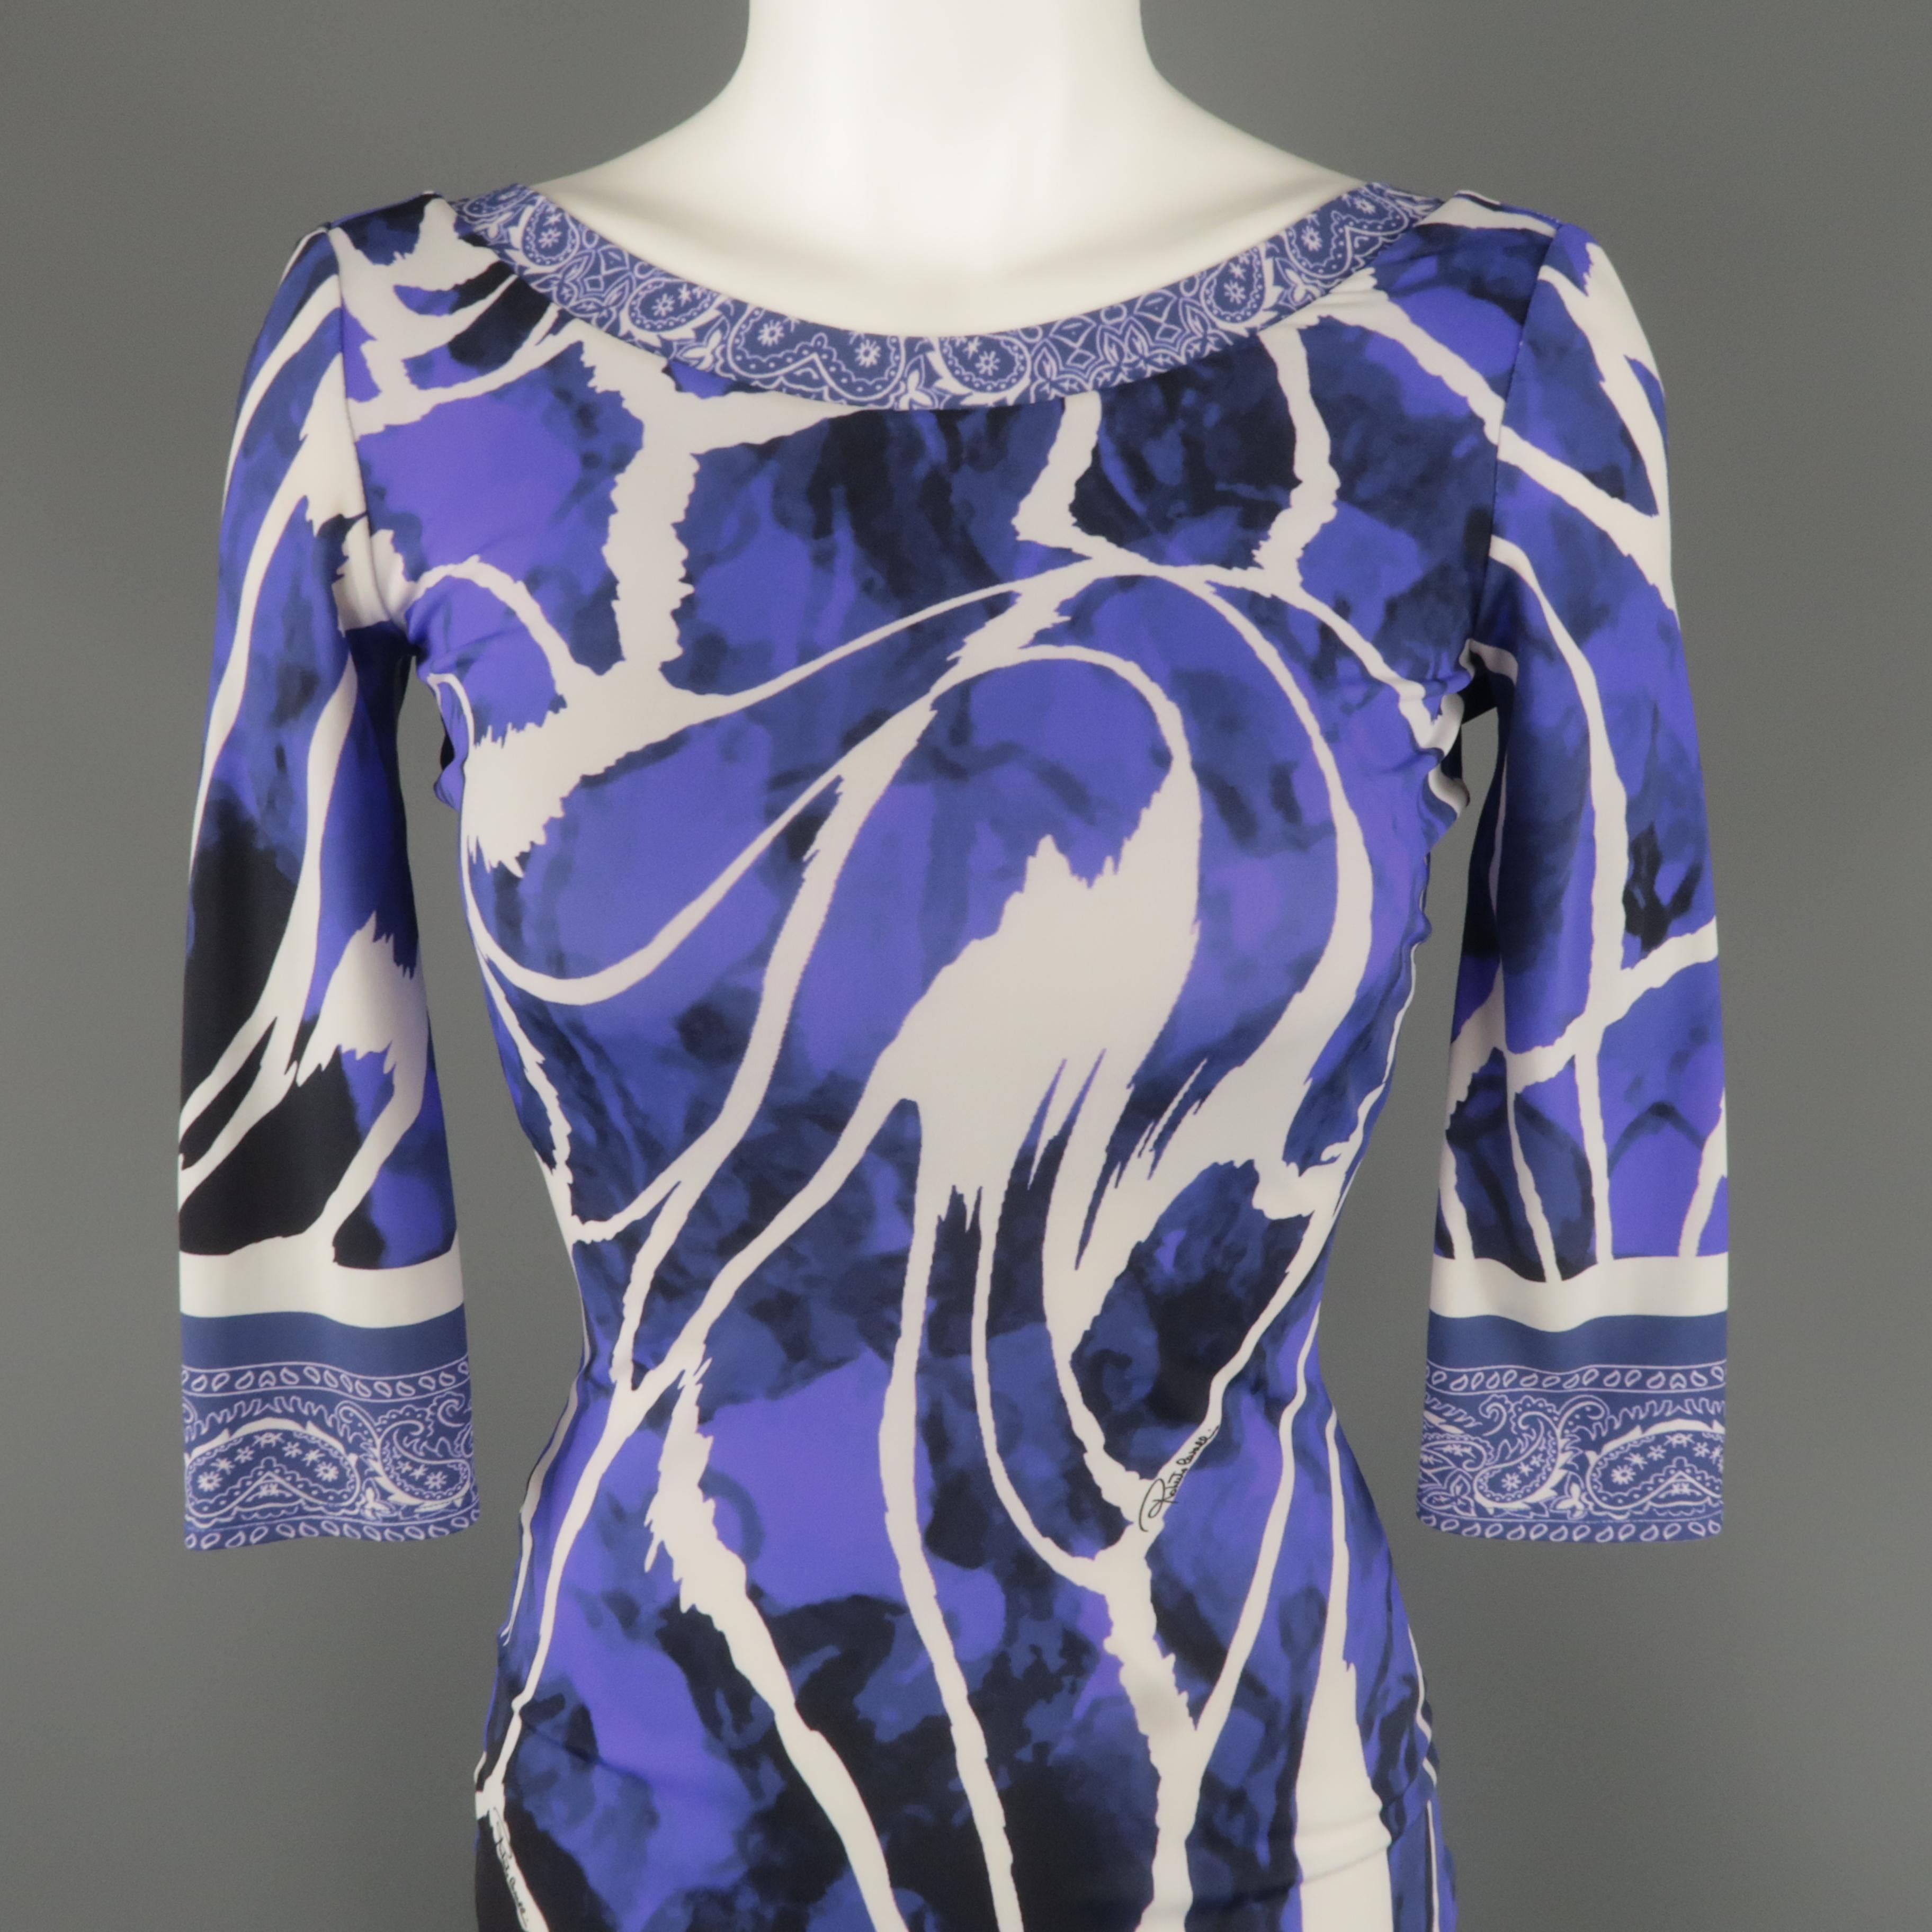 ROBERTO CAVALLI bodycon mini dress comes in purple marble print stretch fabric with a wide neckline, three quarter sleeve, bandana print trim, and deep V back. Made in Italy.
 
Excellent Pre-Owned Condition.
Marked: IT 38
 
Measurements:
 
Shoulder: